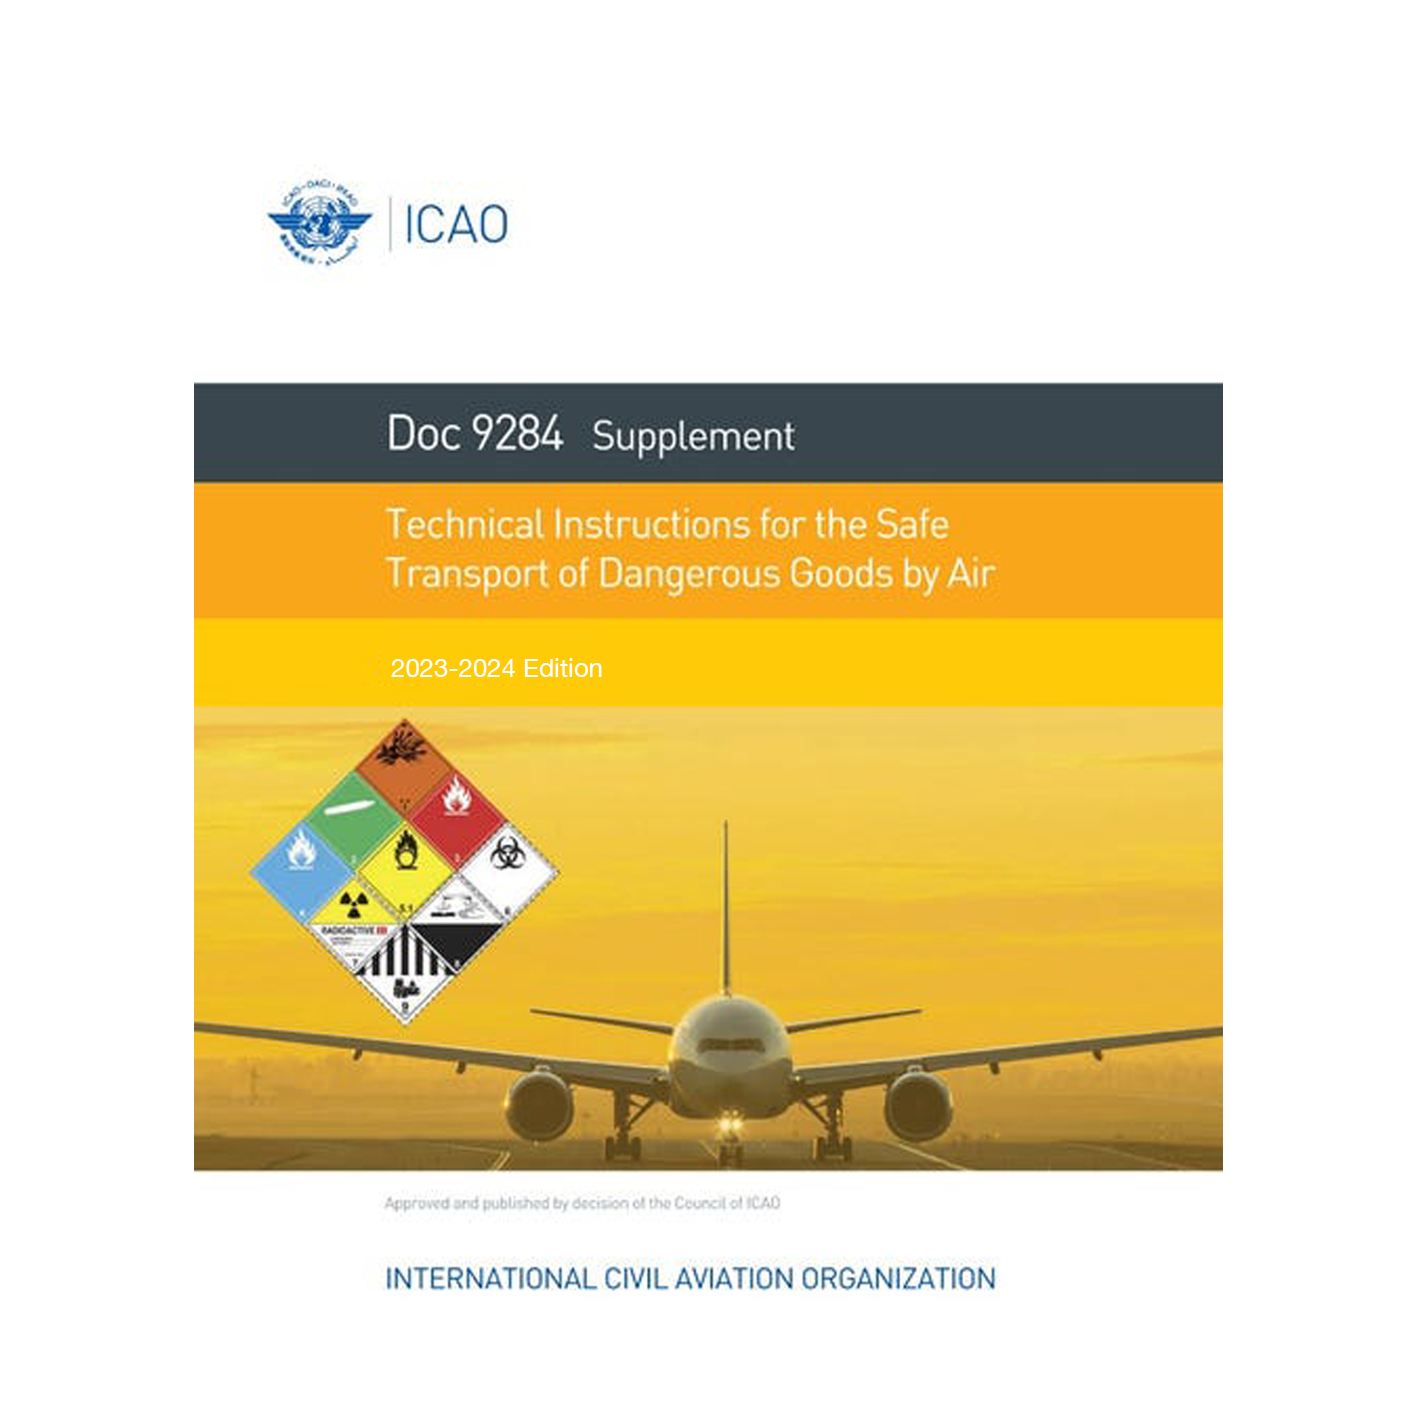 Supplement of the ICAO, 2023-2024 Edition